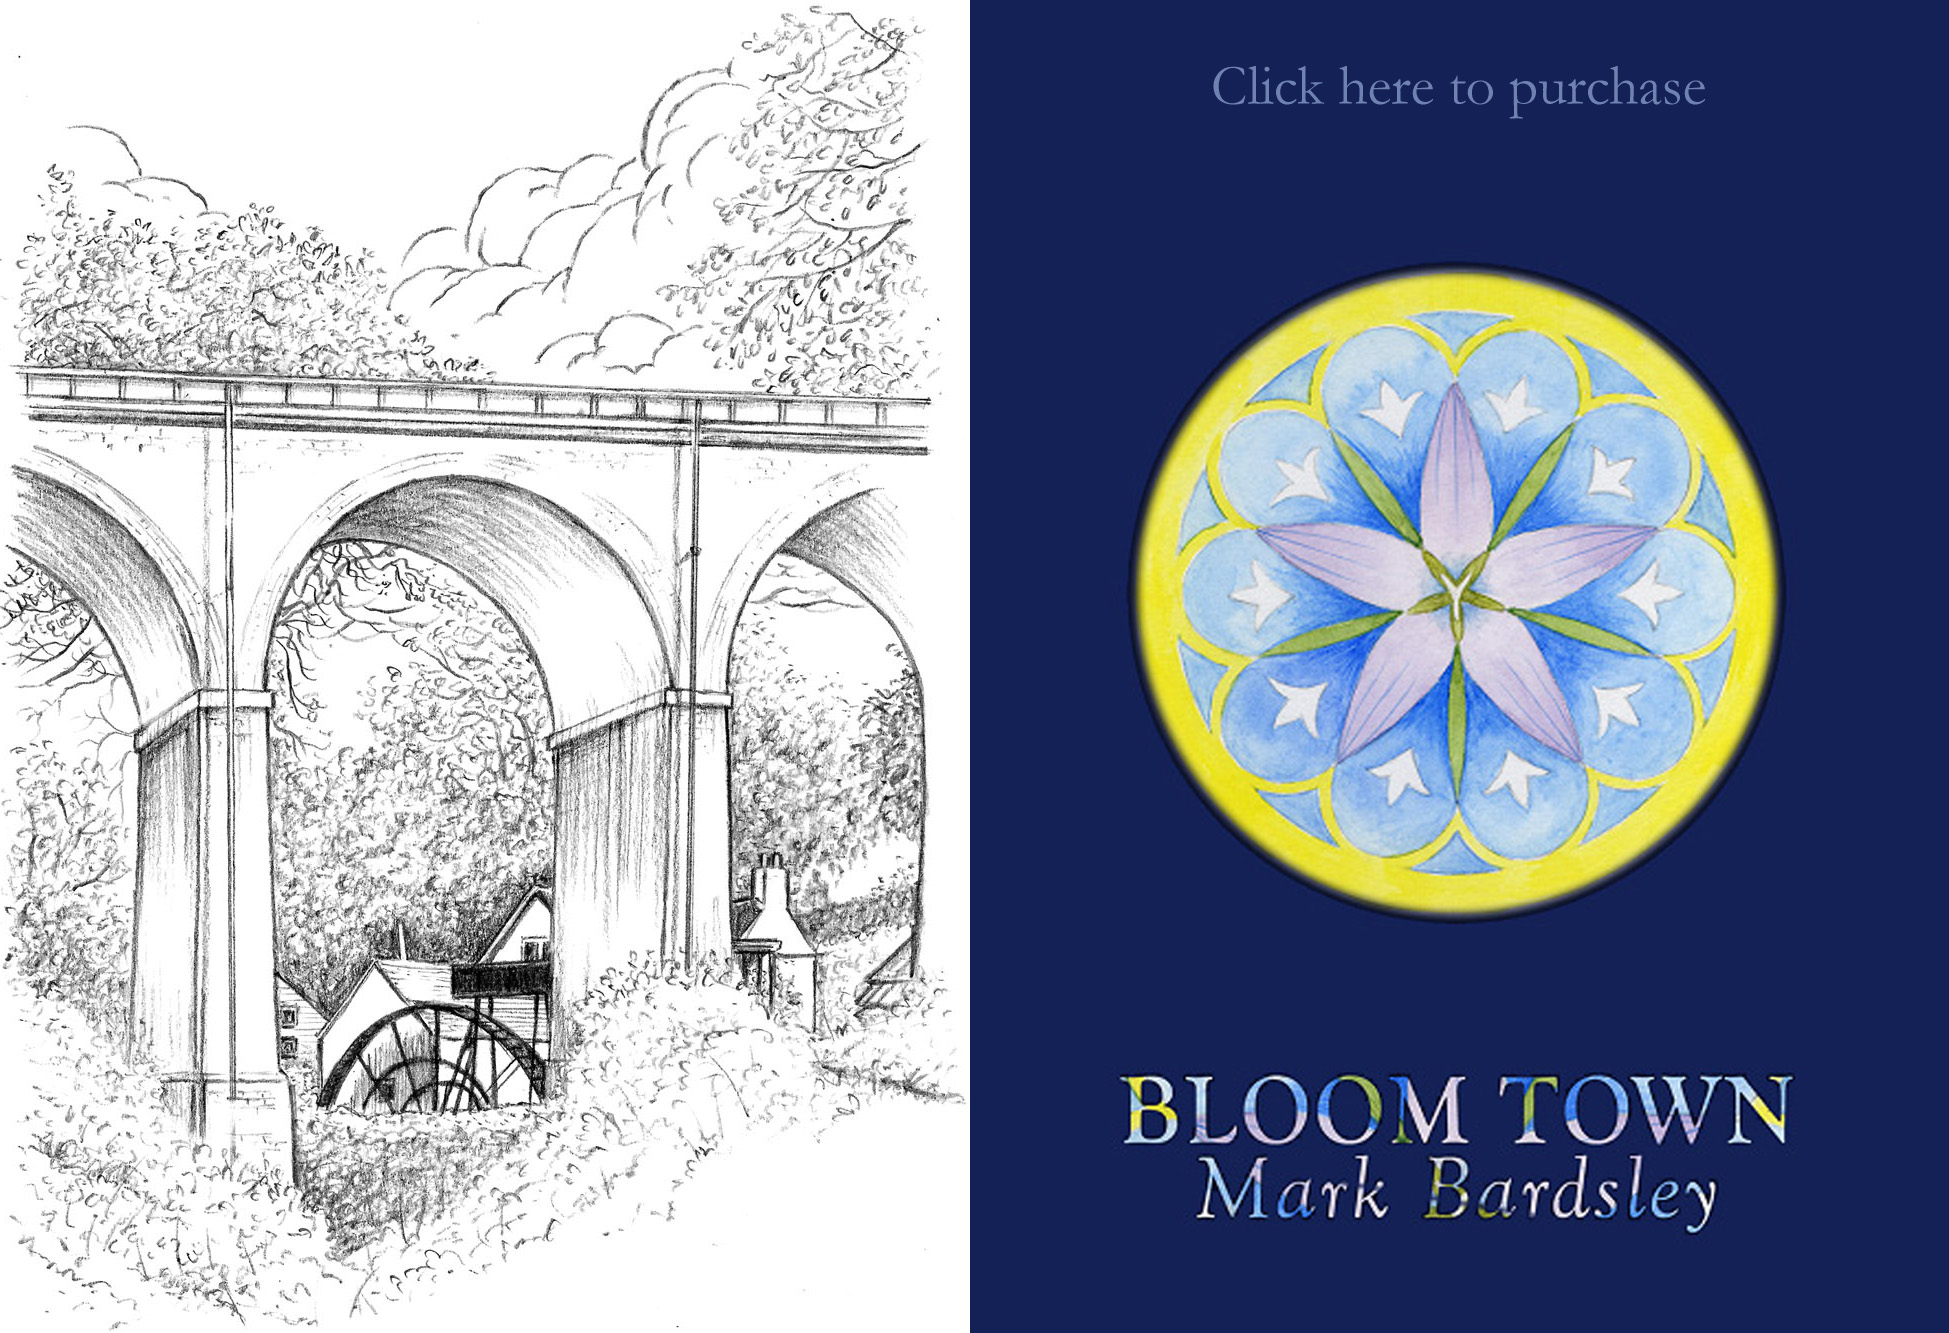  water mill illustration and Bloom Town cover design linked to Yew Tree Press website for purchasing